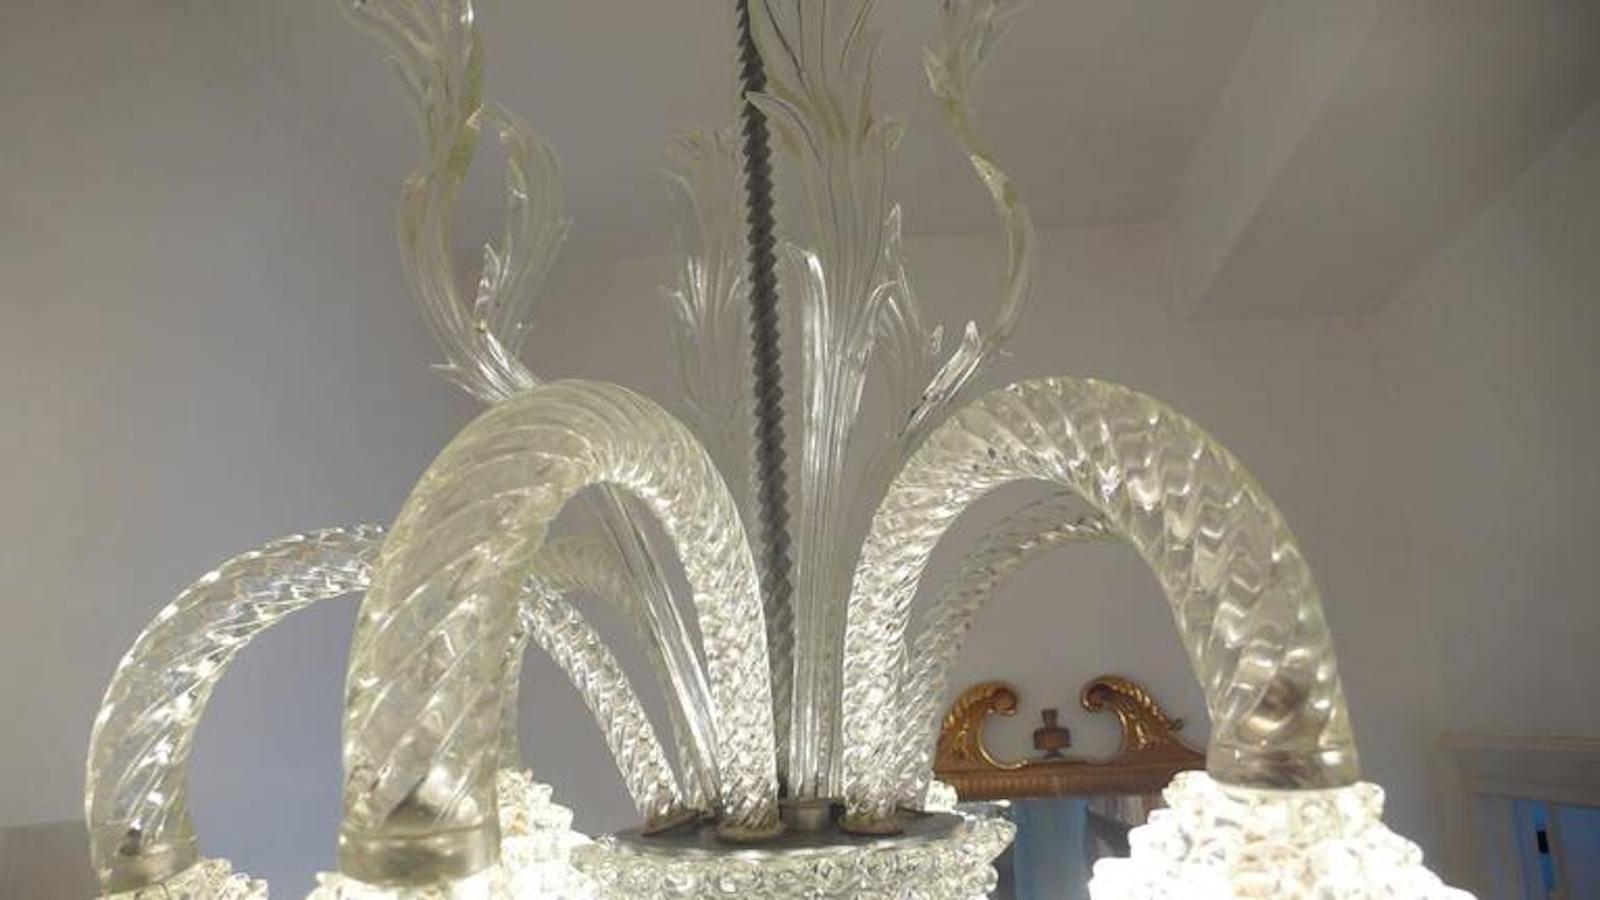 Chandelier realized by the famous glass artist Ercole Barovier. The chandelier looks powerful and cluttered with transparency. What it takes to turn a room into a cathedral of light. From the private collection of Baron Von Plant.